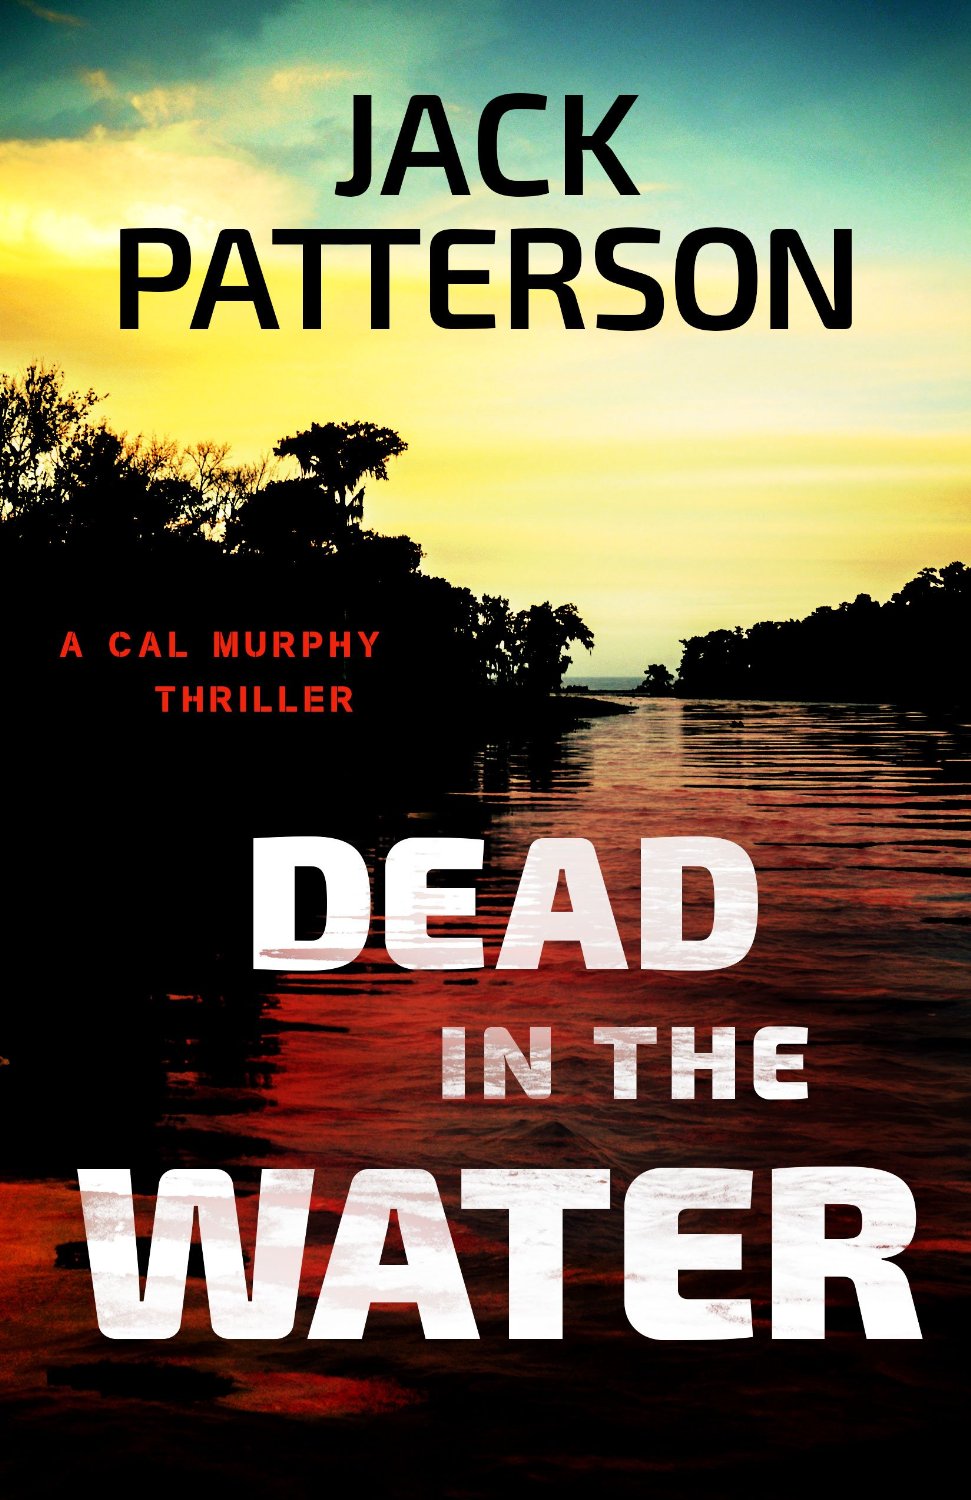 Dead in the Water (A Cal Murphy Thriller Book 4) by Jack Patterson